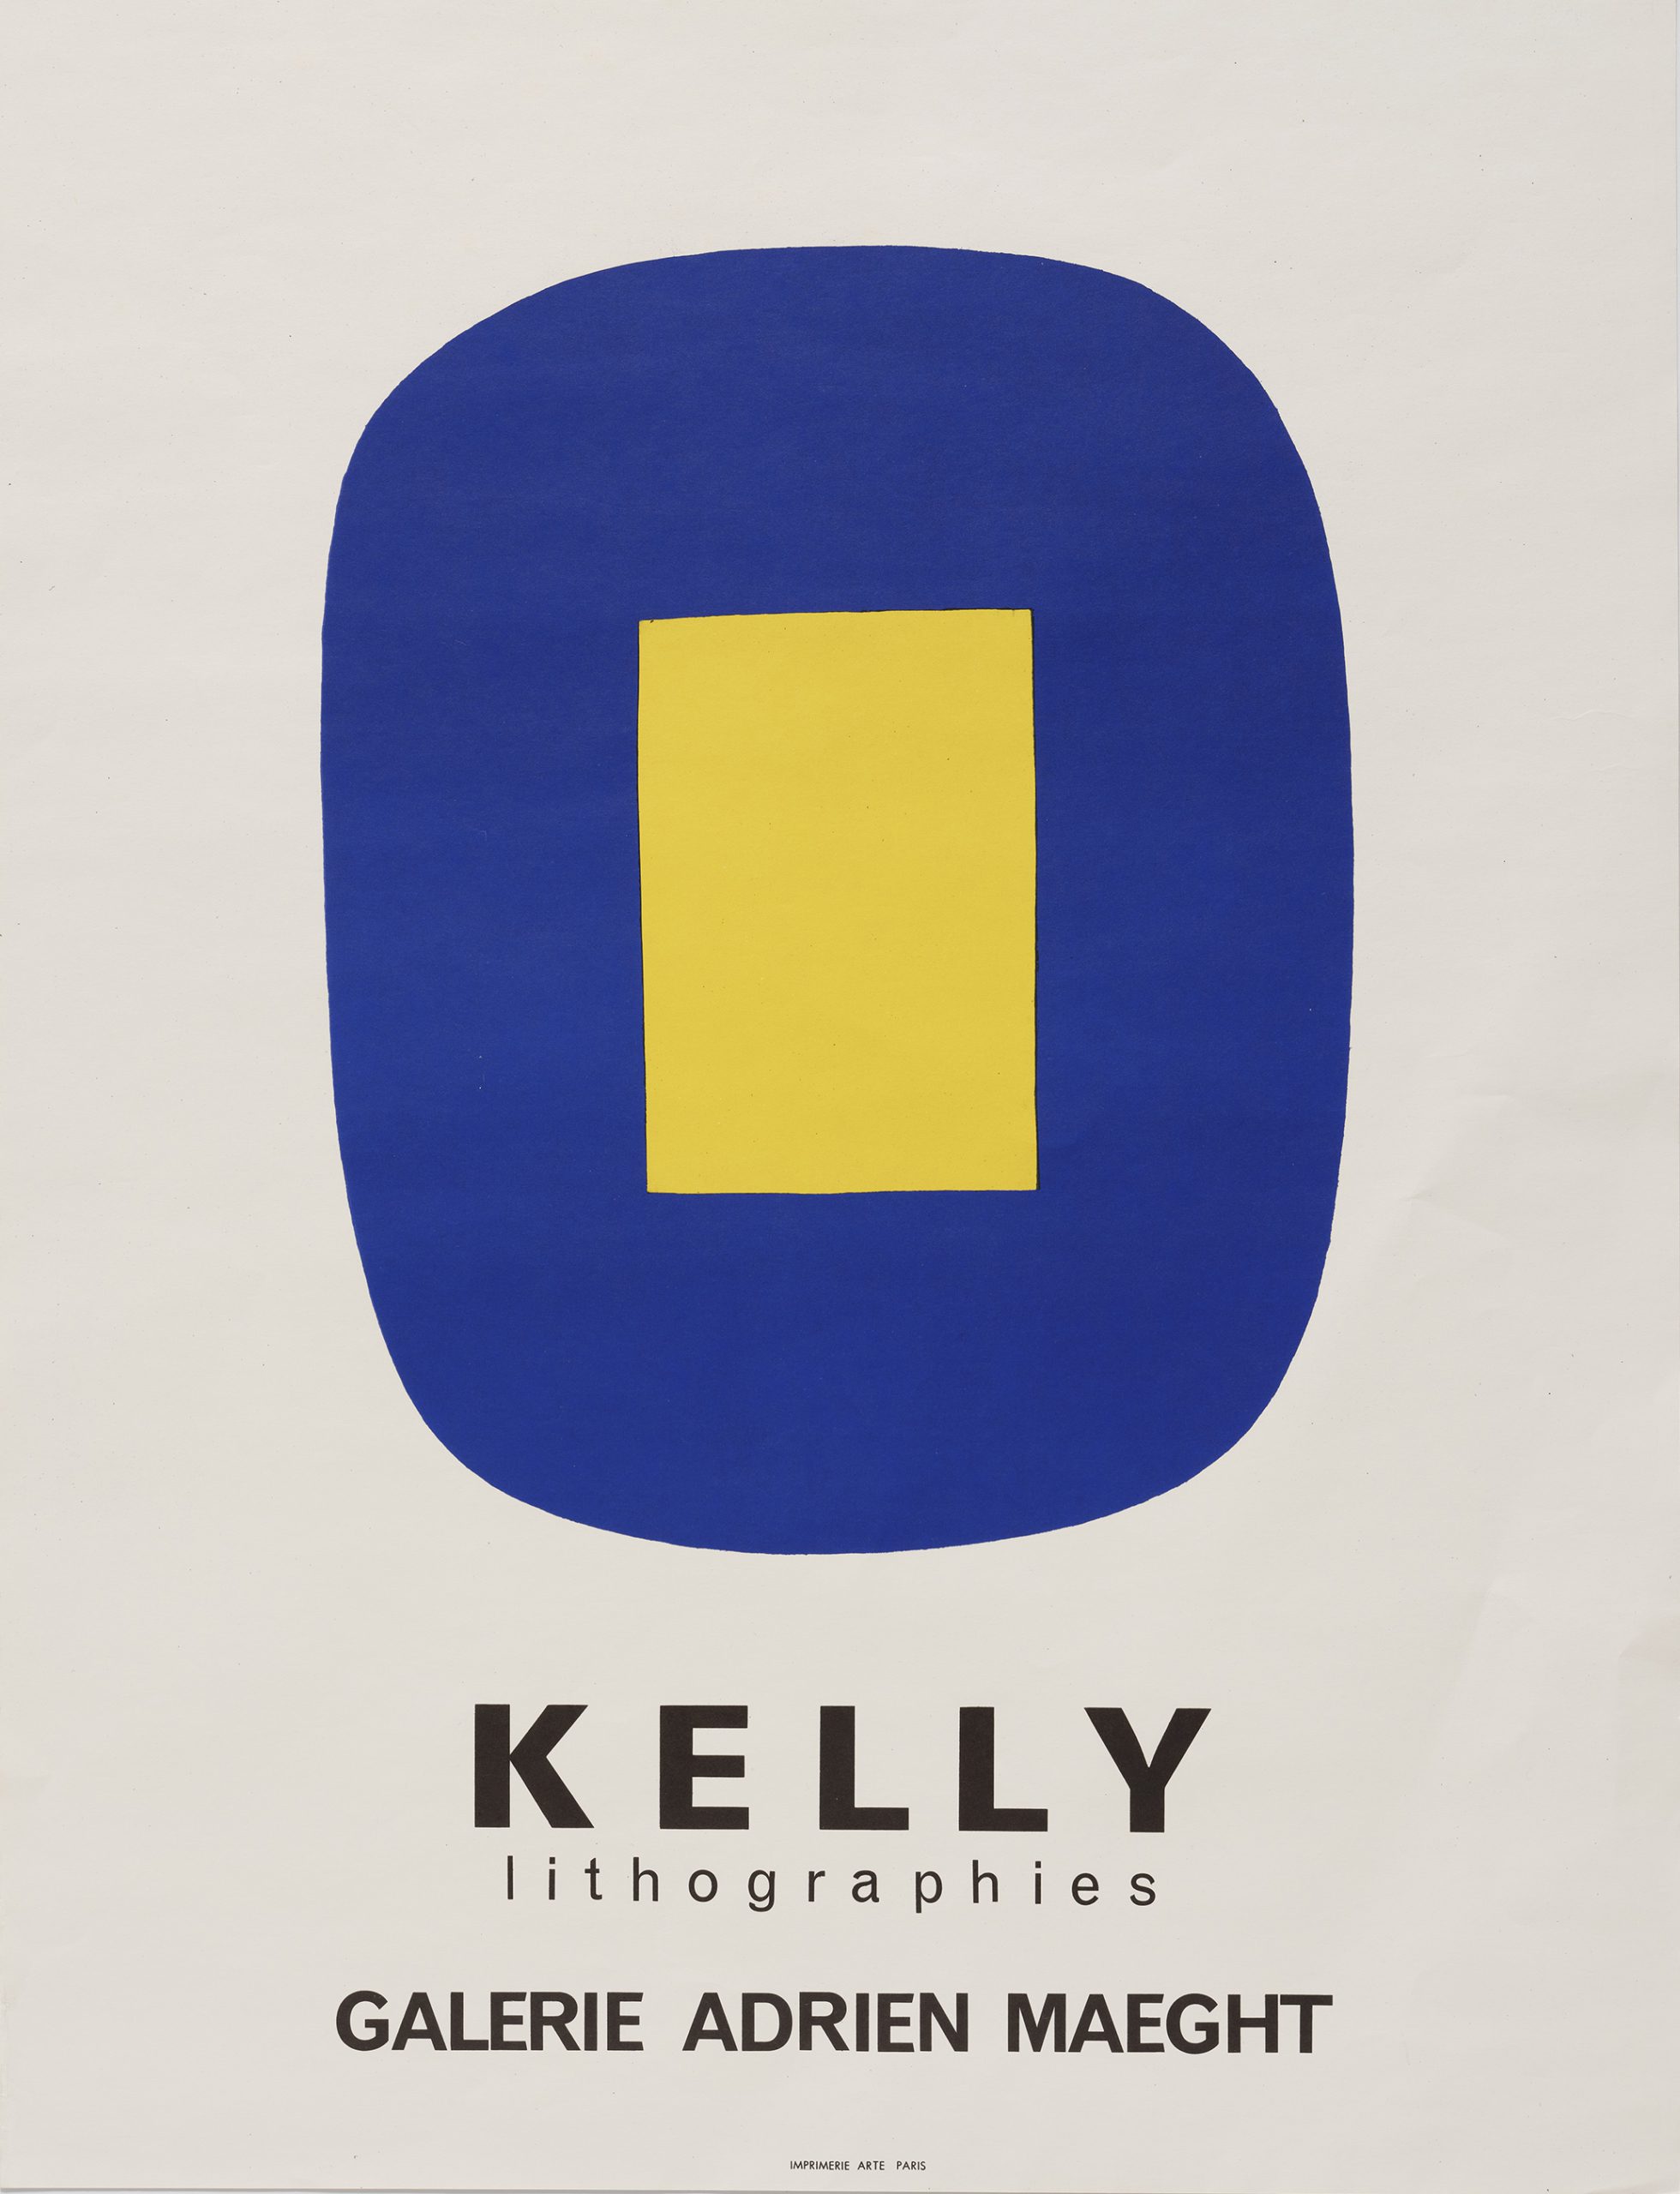 Kelly Lithographies, Galerie Adrien Maeght  (Blue with Yellow) by Ellsworth Kelly